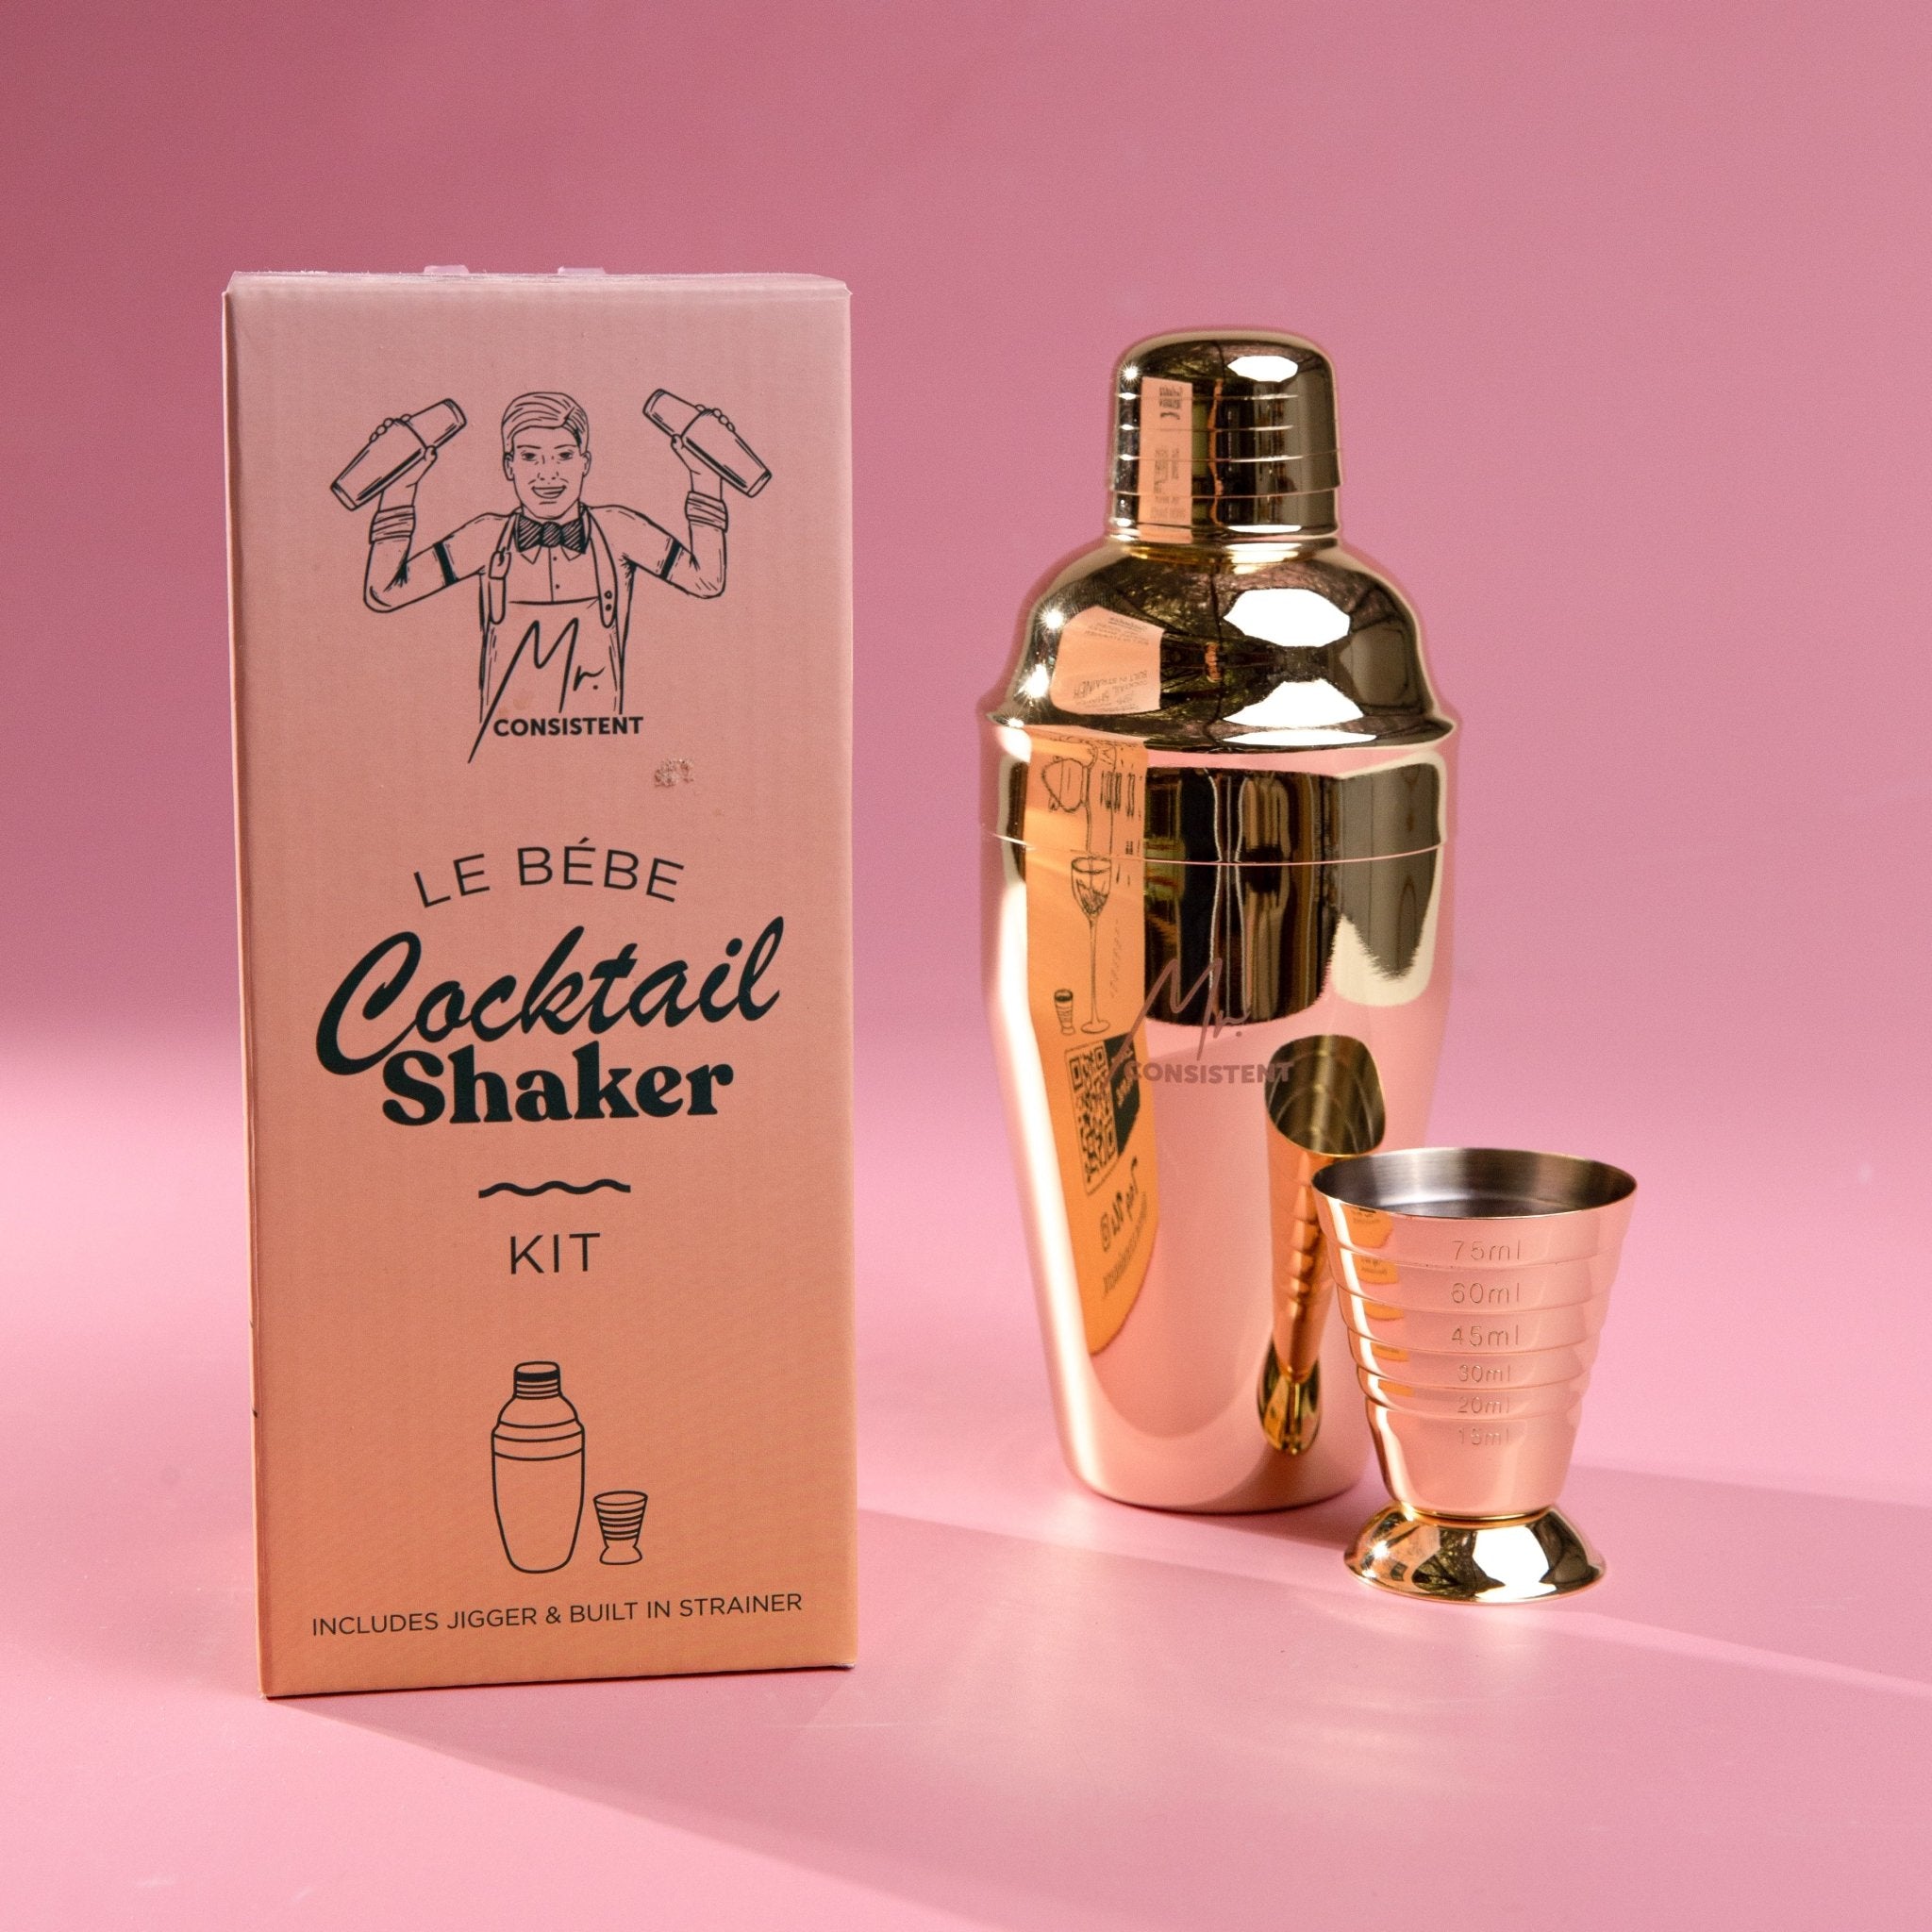 Essential Party Pack Gift Box w/ Cocktail Shaker - Mr. Consistent